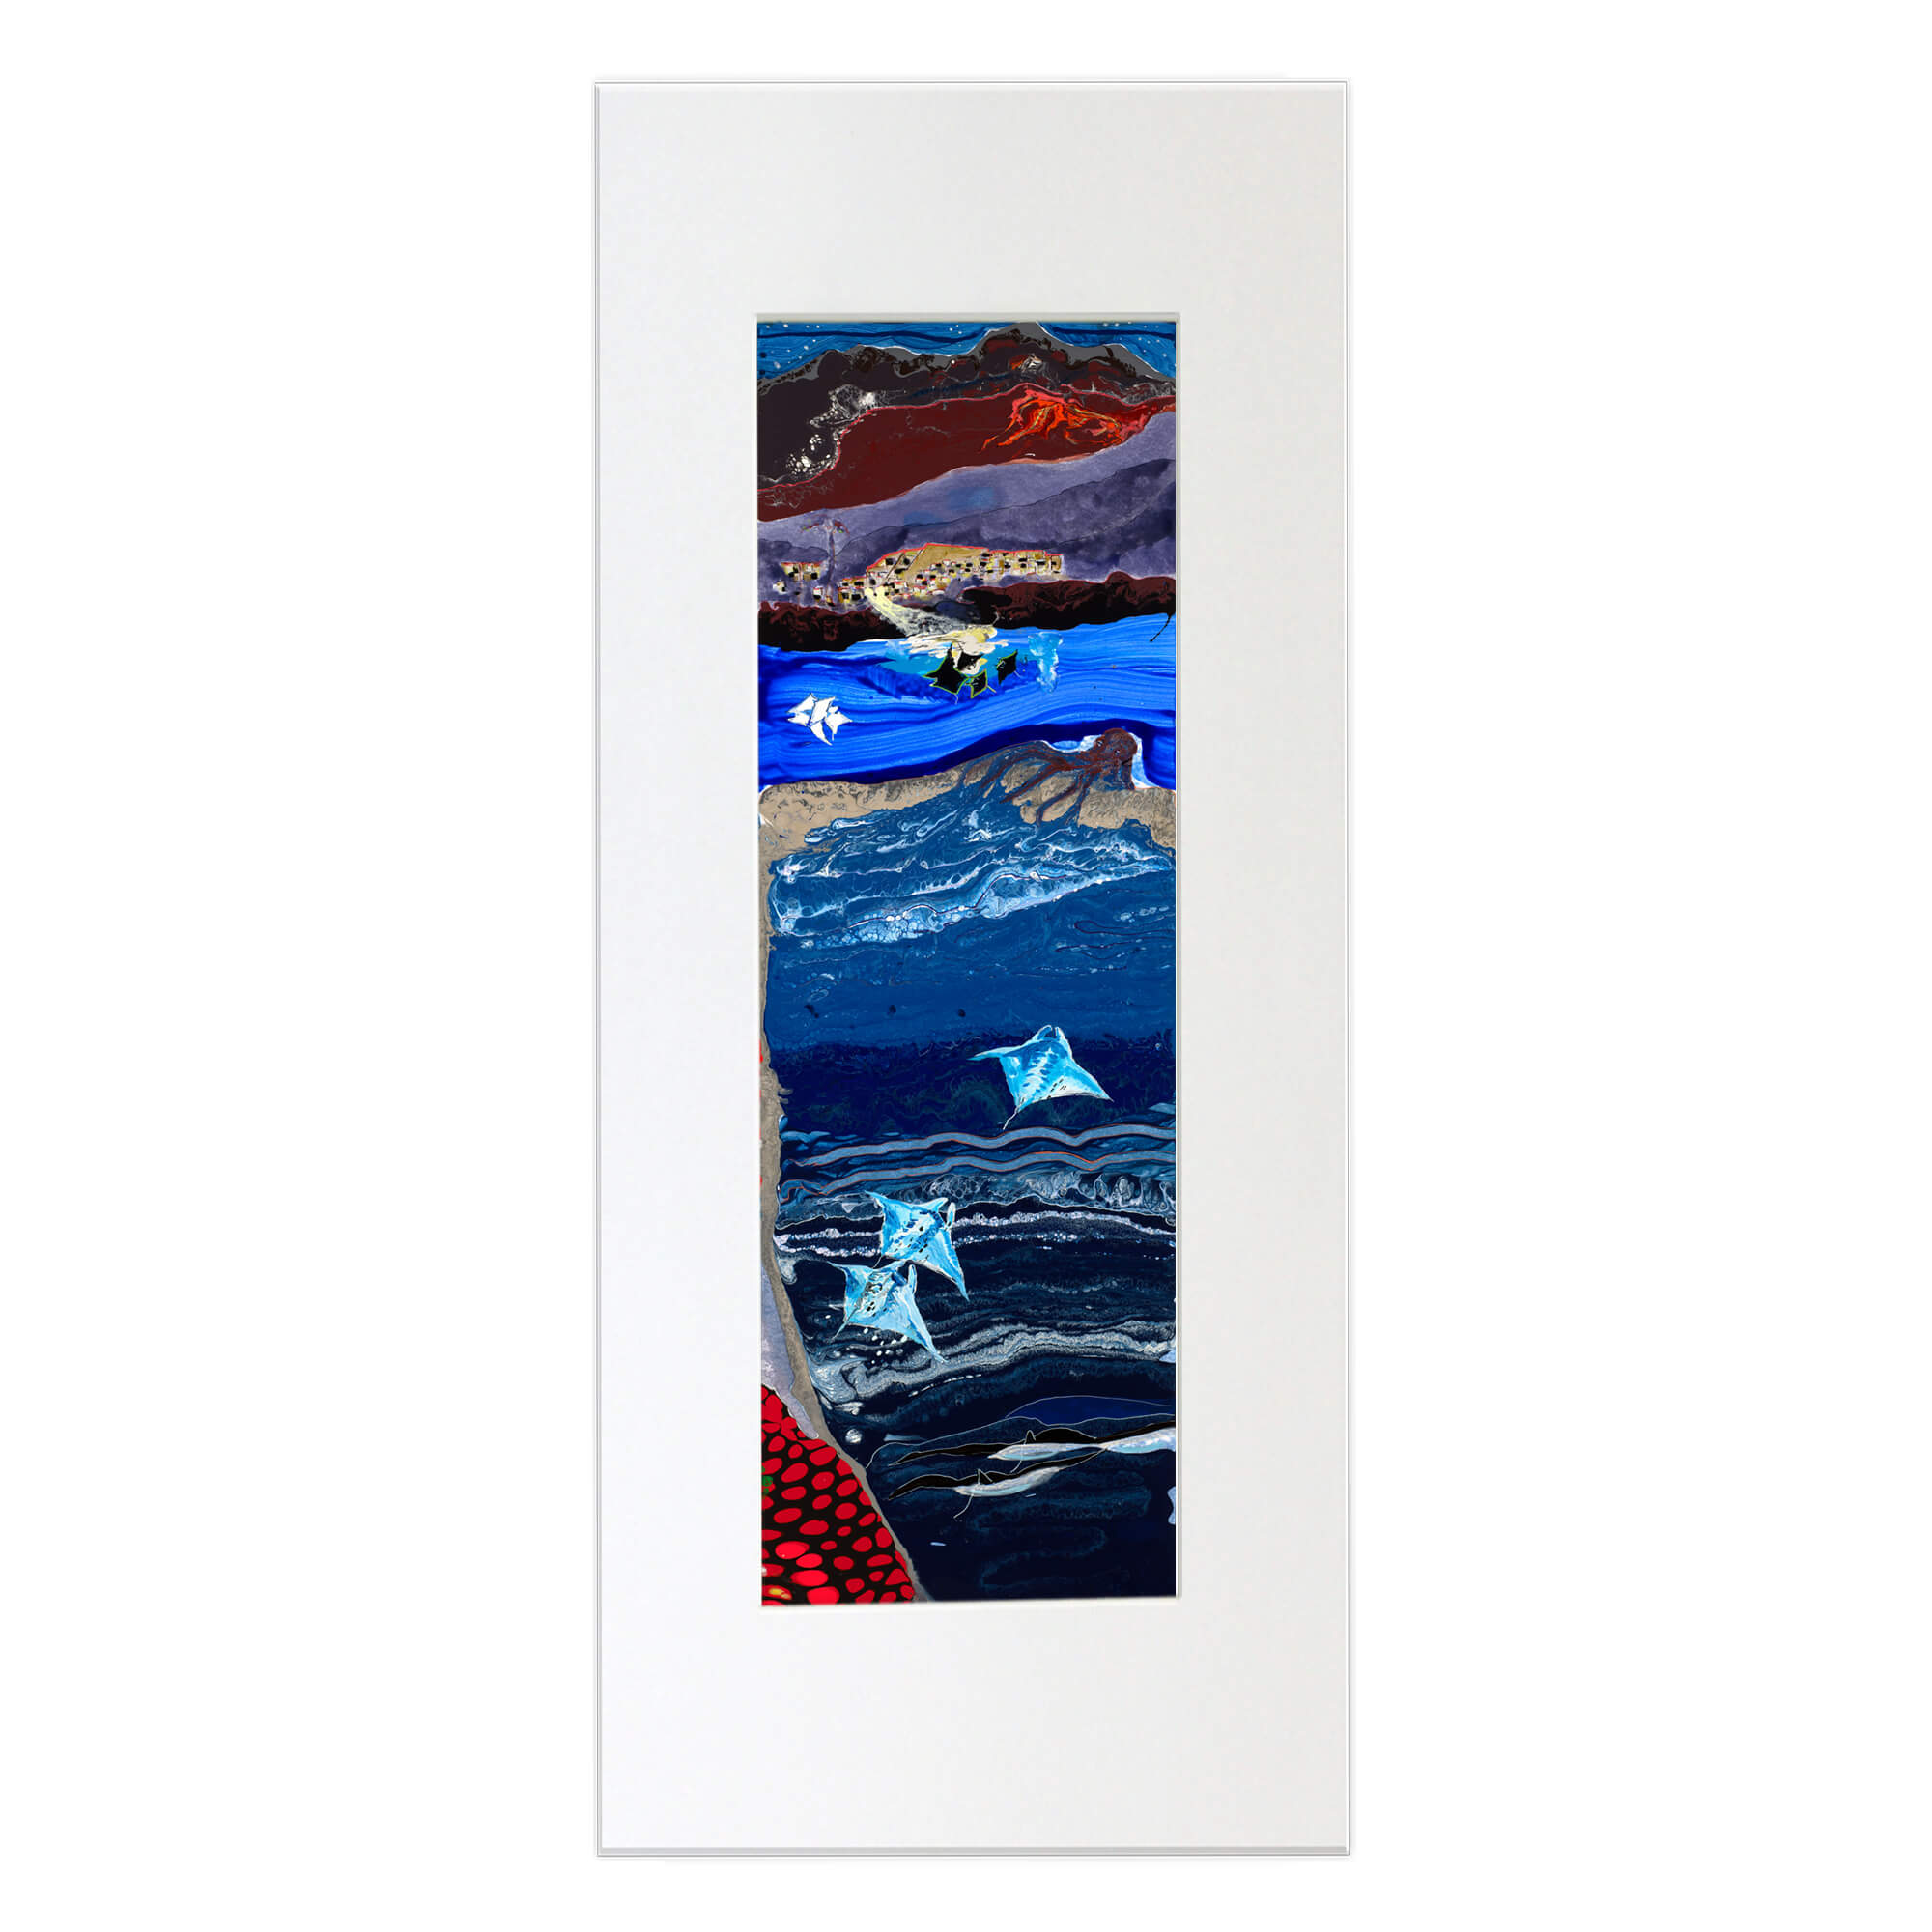 Matted art print showcasing the ocean floor with multiple colors and layers by hawaii artist robert hazzard